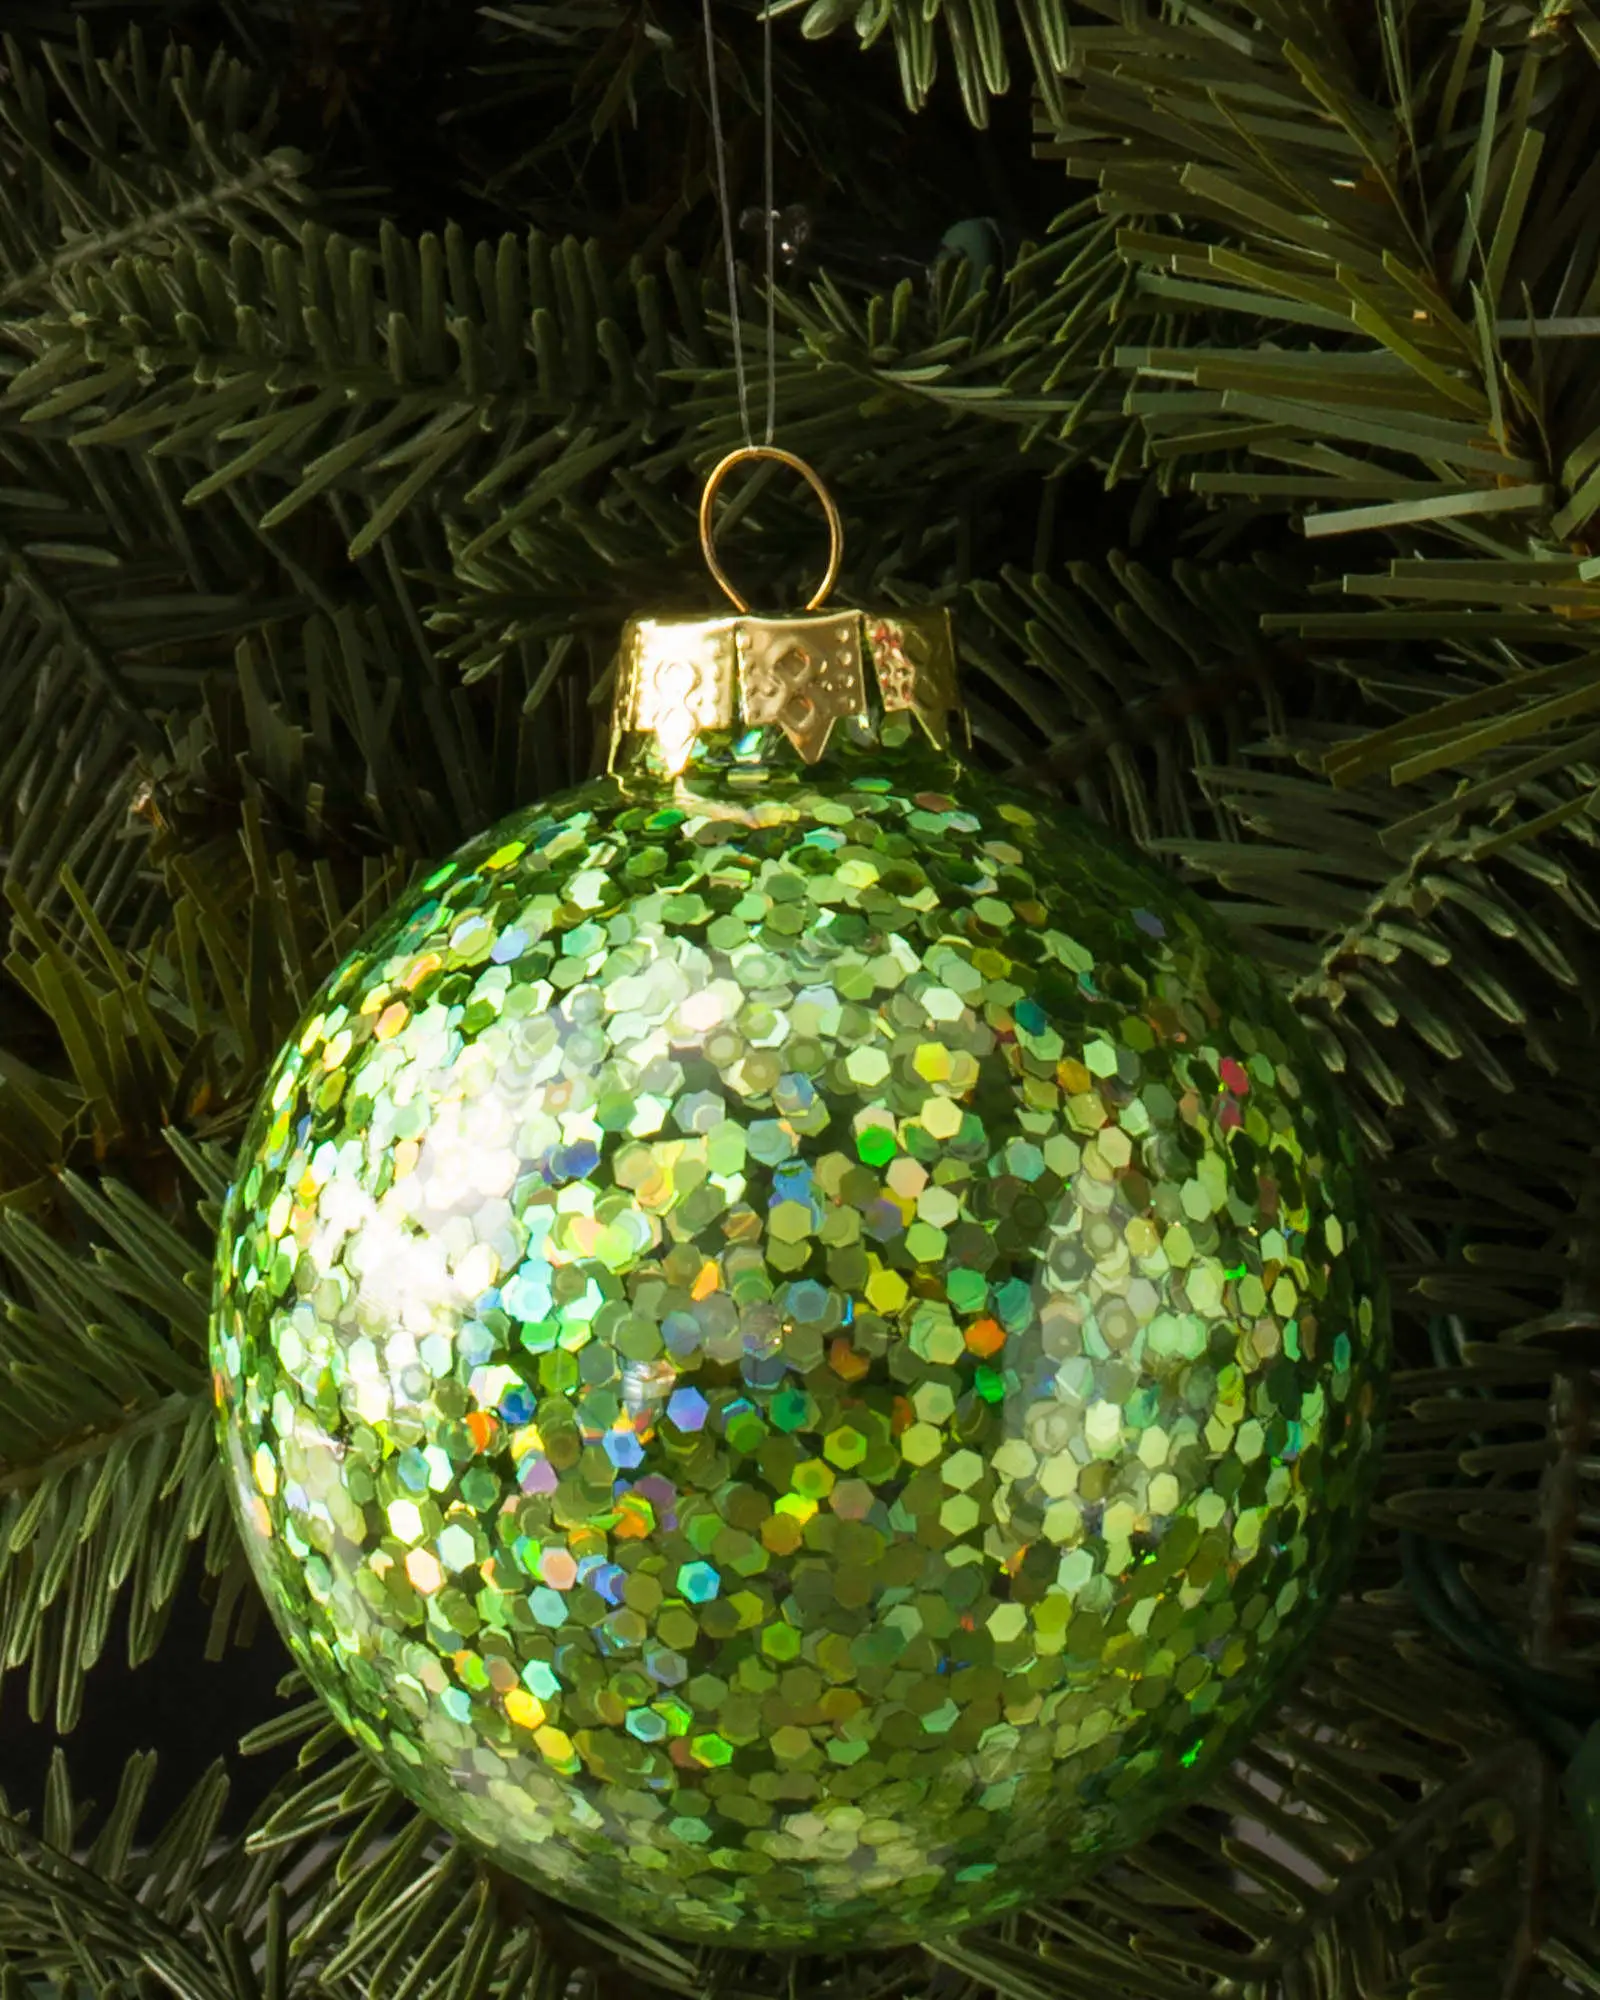 Details about   Christmas Glass Ornament Ball Pearly with Mistletoe Decoration/Variety of Colors 